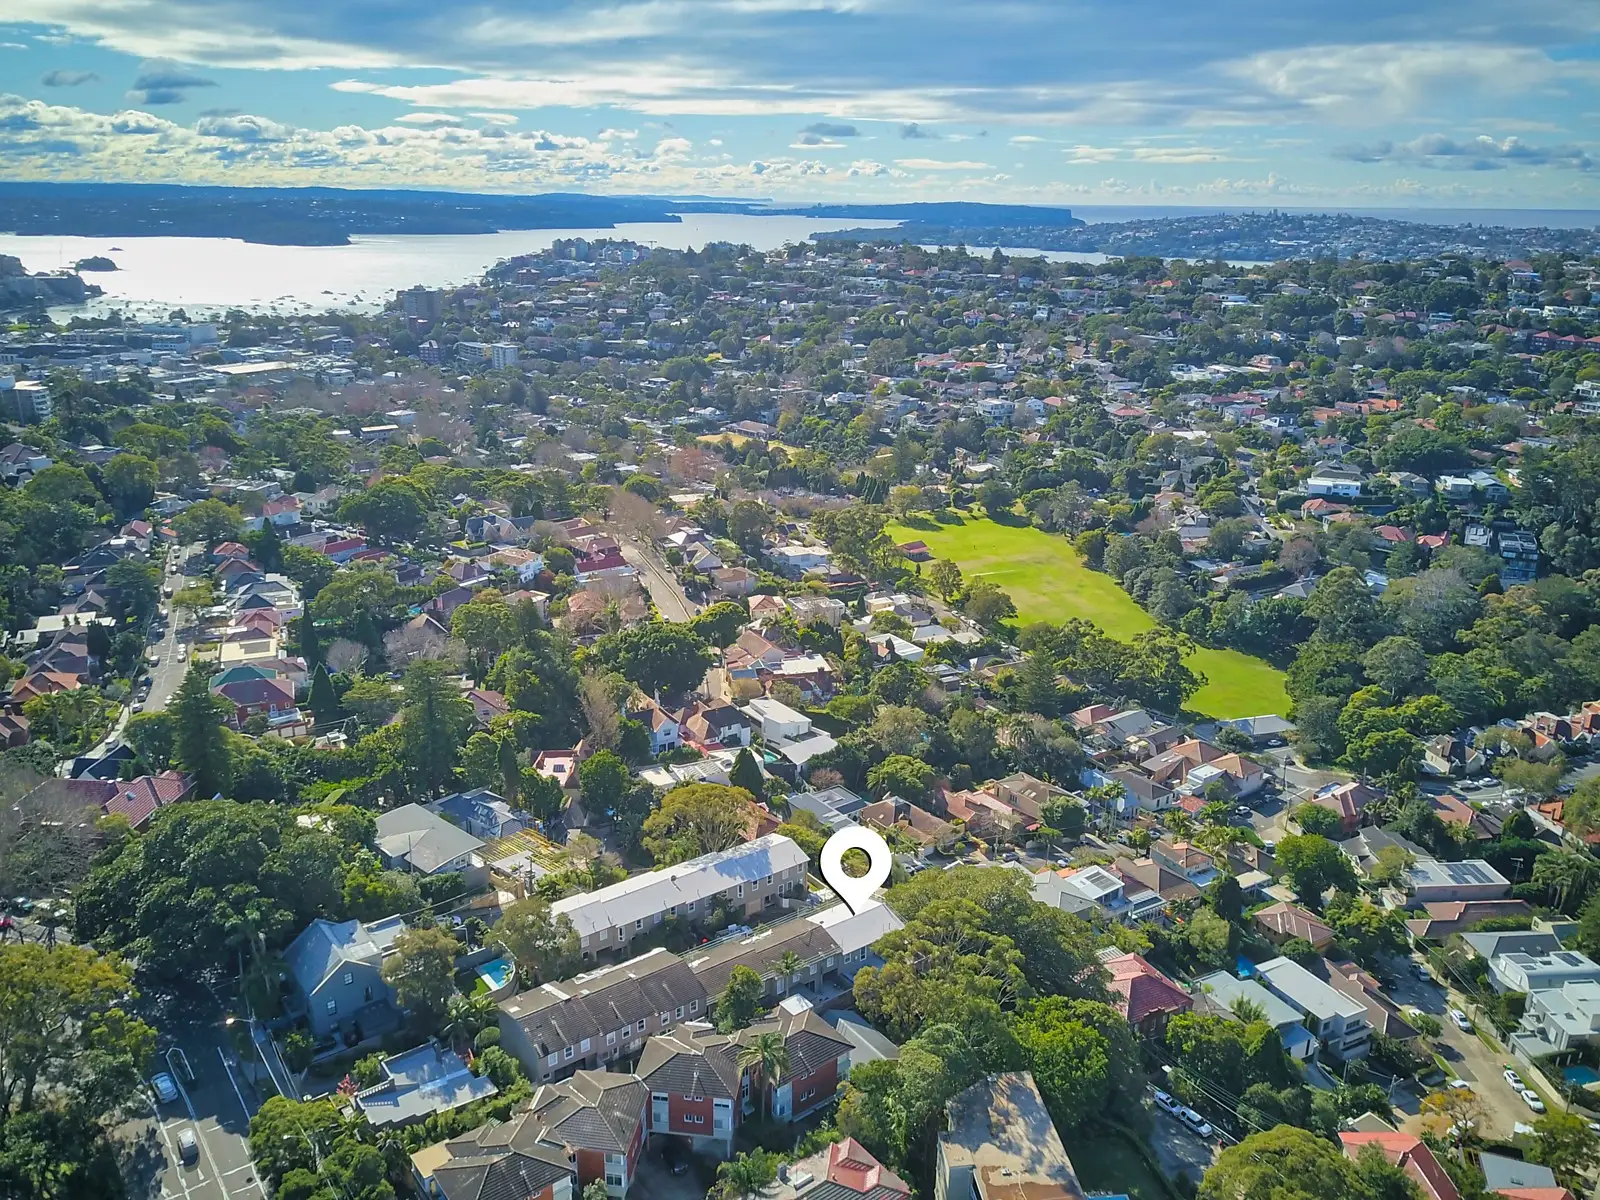 Photo #1: 6/275 Edgecliff Road, Woollahra - Sold by Sydney Sotheby's International Realty